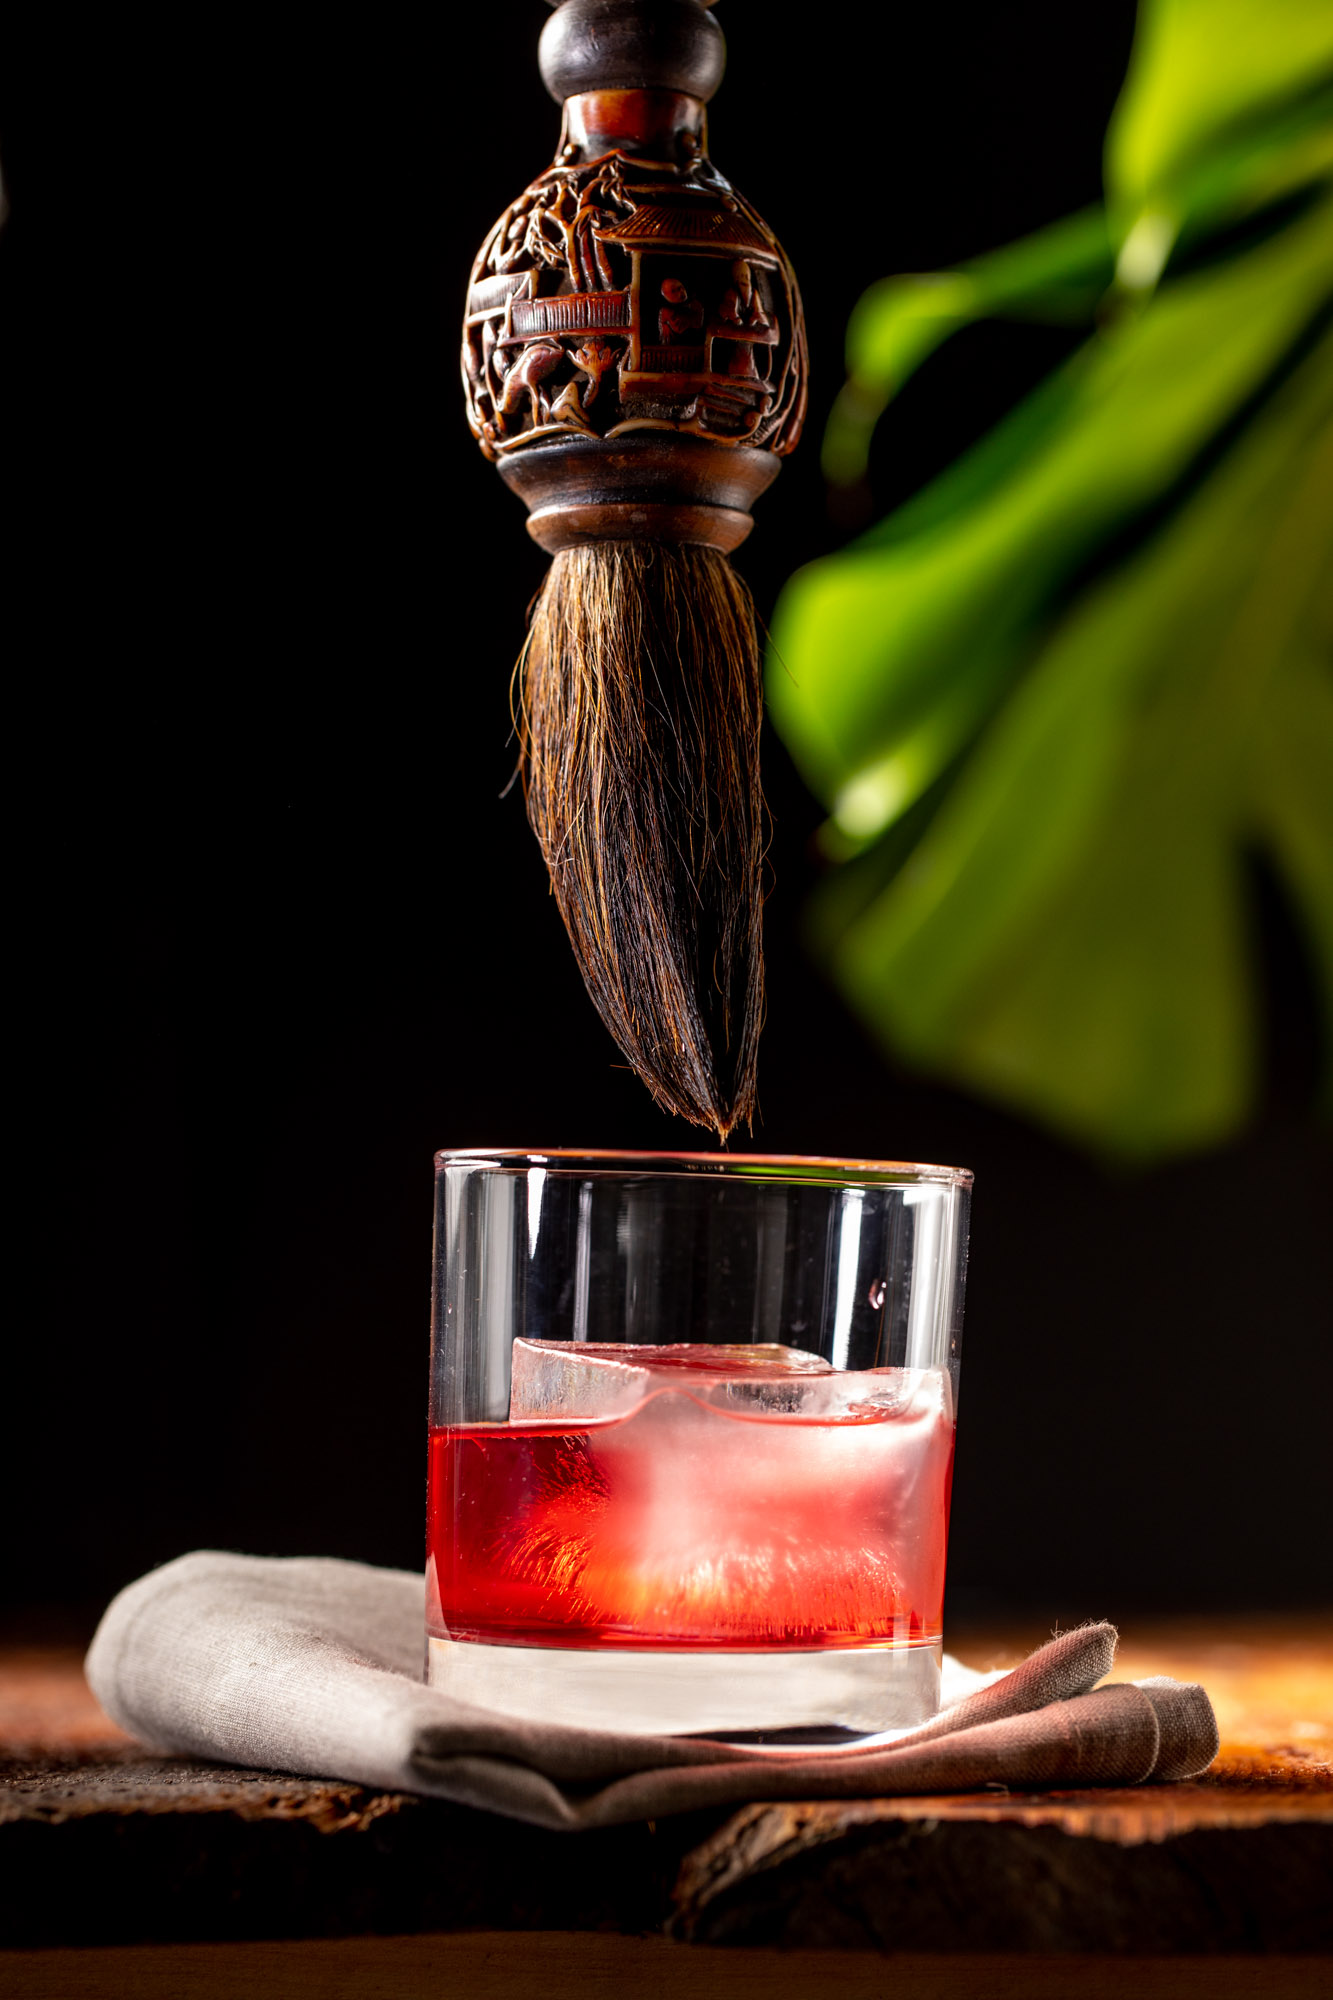 An artistic approach to photographing a cocktail